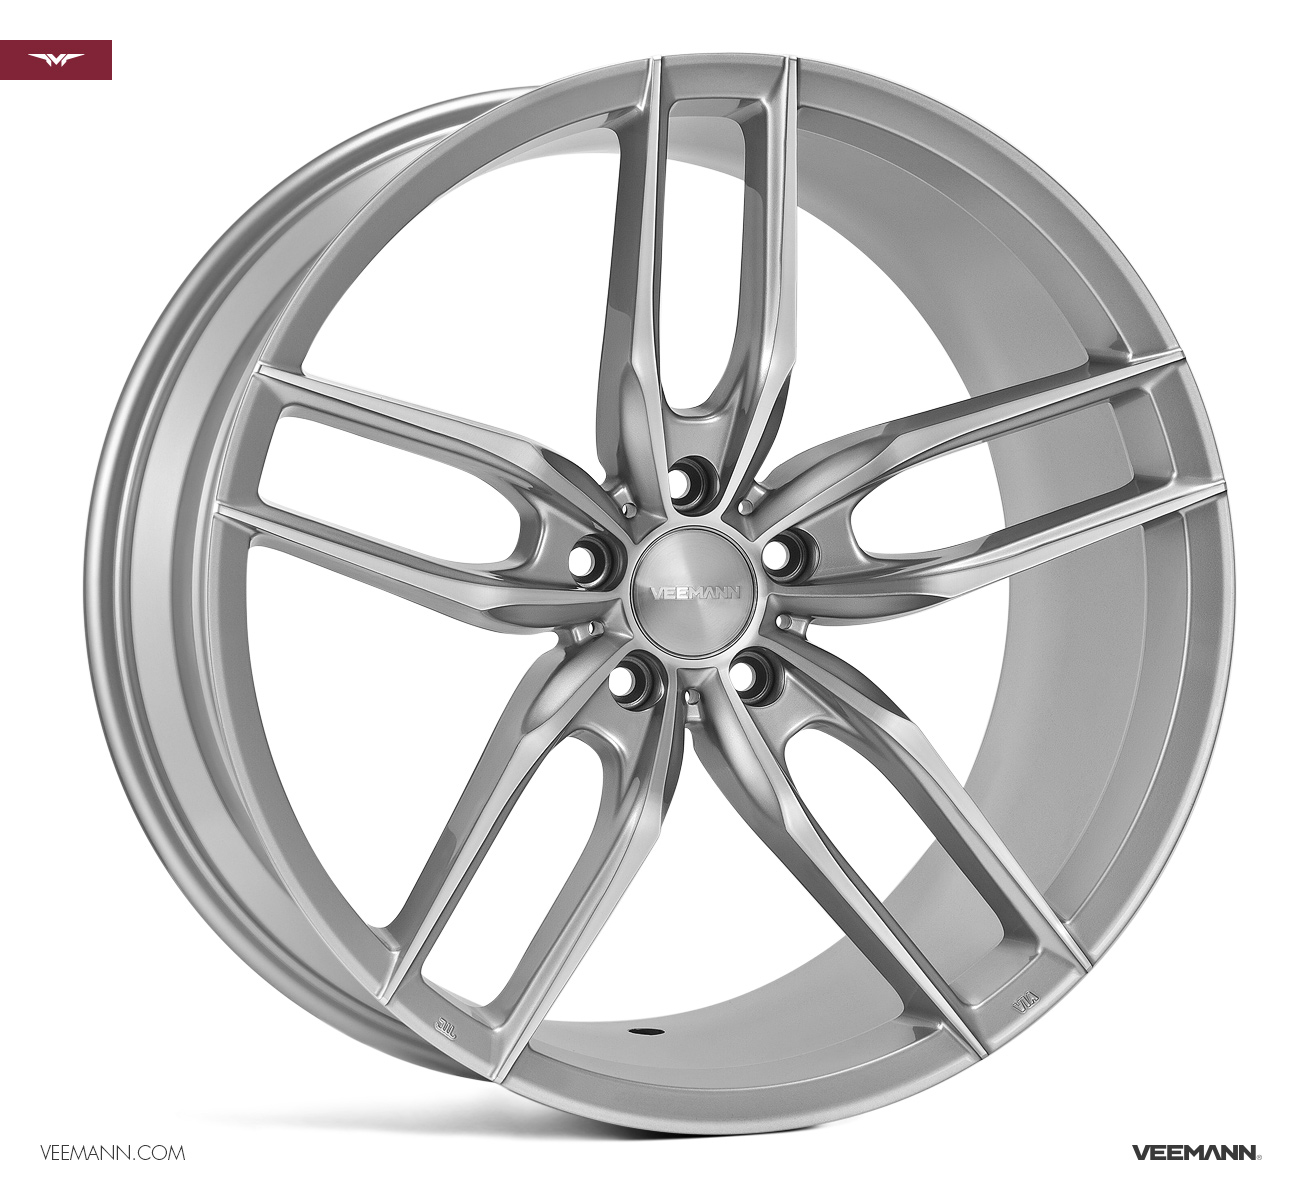 NEW 22" VEEMANN V-FS28 ALLOY WHEELS IN SILVER WITH POLISHED FACE WITH DEEPER CONCAVE 10.5" REARS